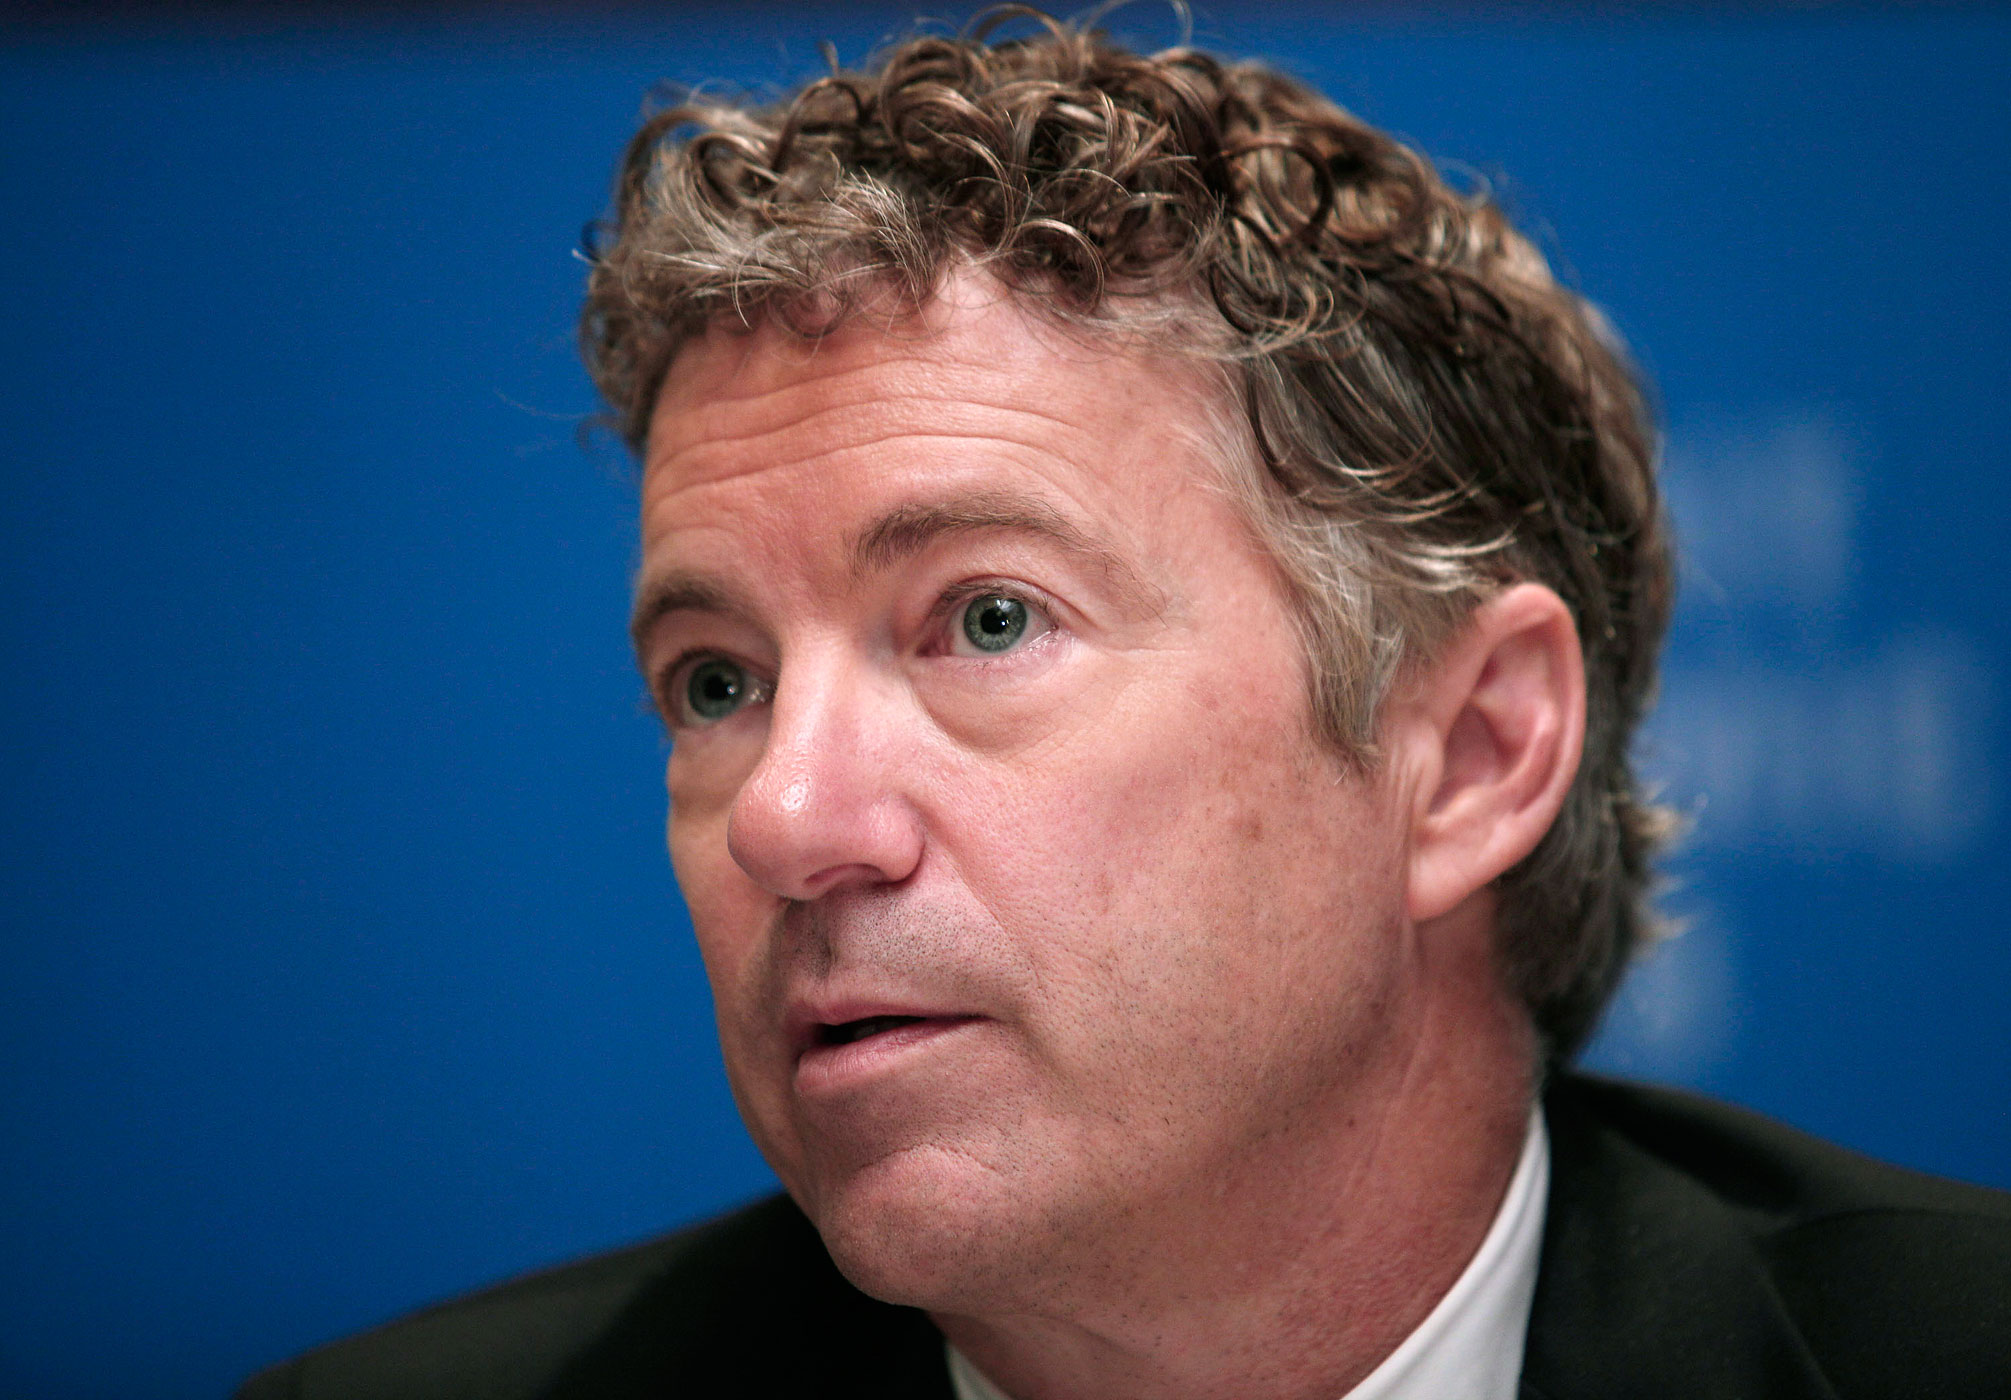 Sen. Rand Paul speaks with the news media after delivering a speech at the Detroit Economic Club on Dec. 6, 2013 in Detroit, Michigan. (Bill Pugliano—Getty Images)